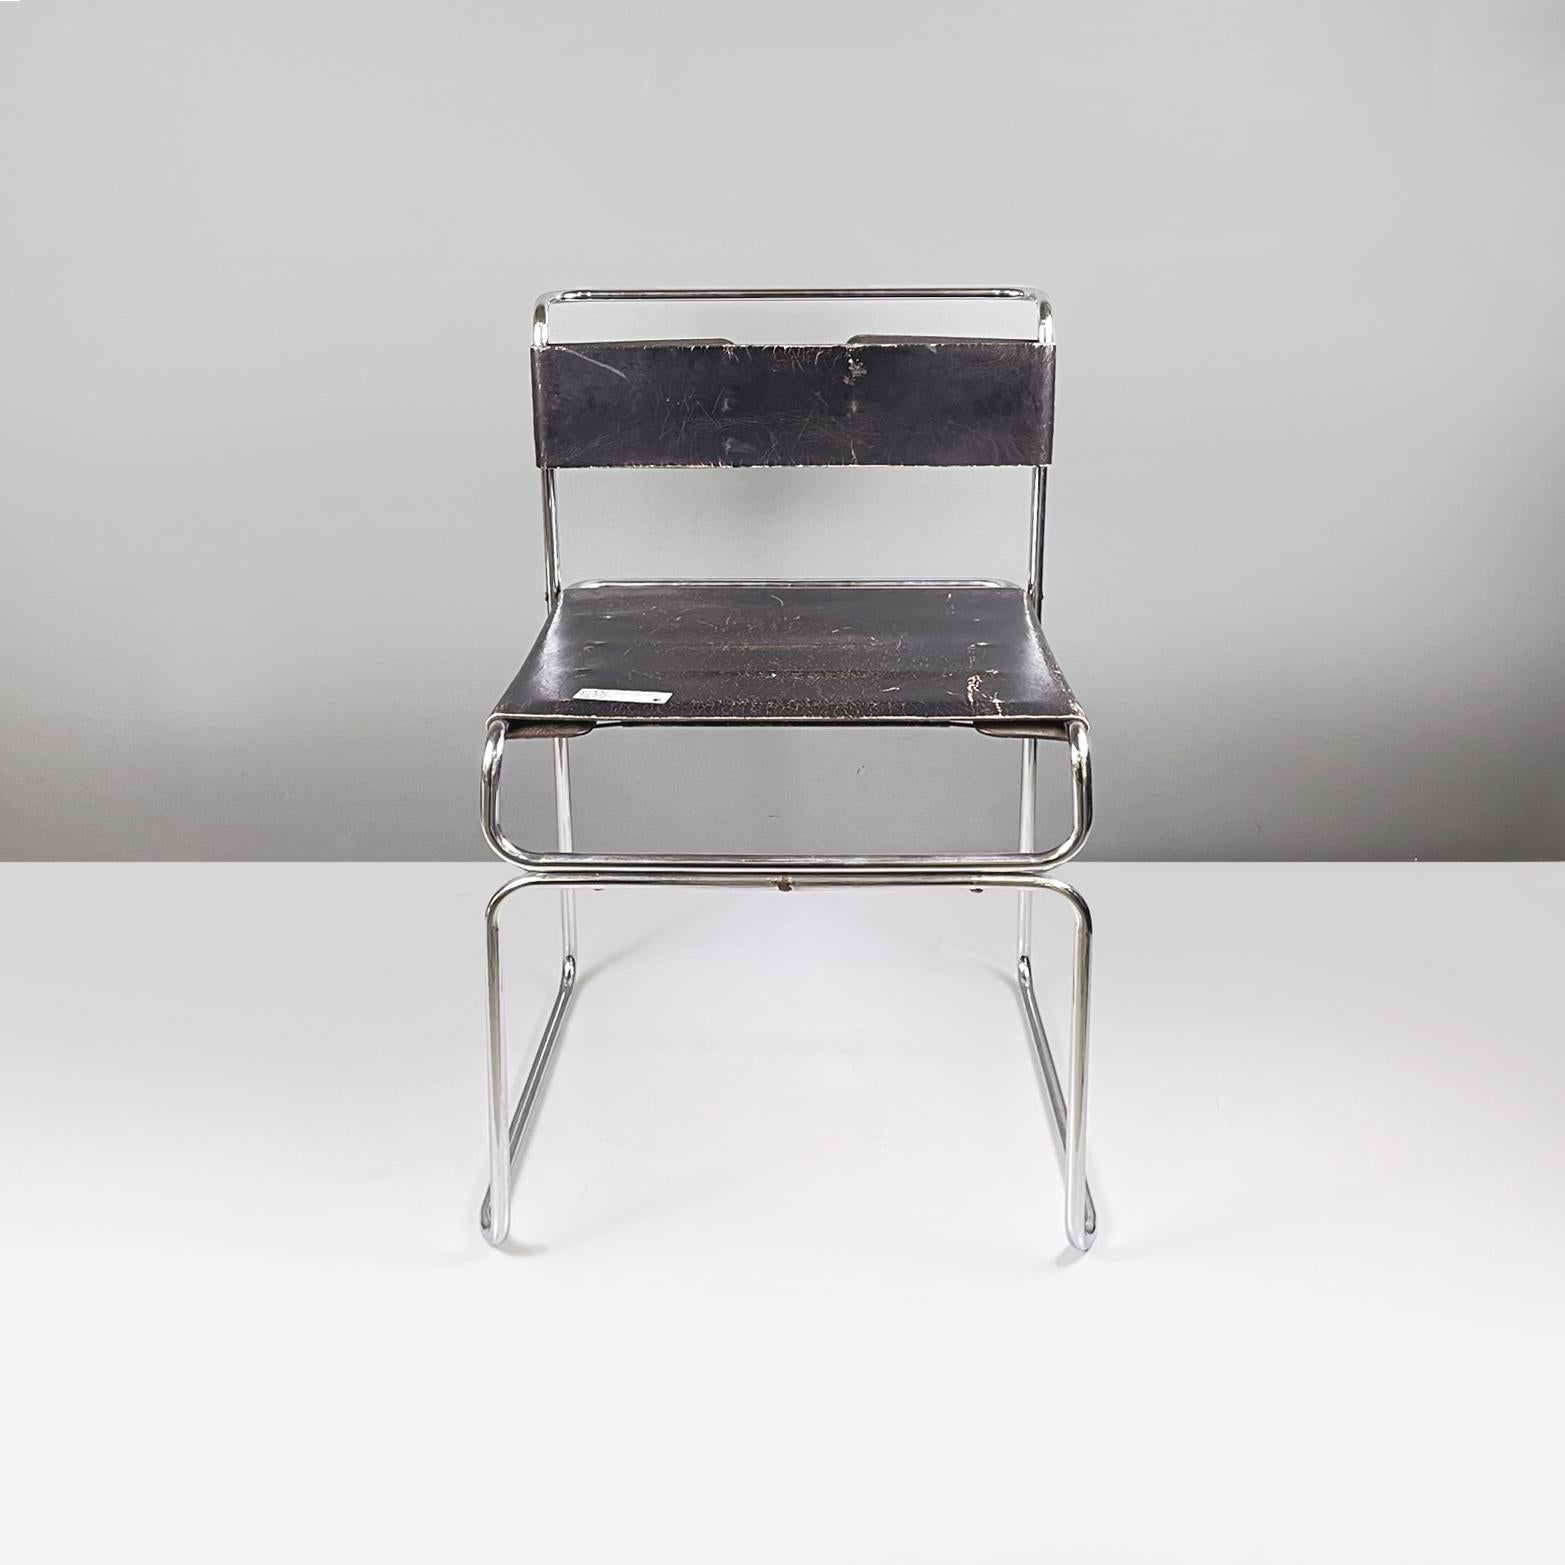 Italia modern Black leather and steel Chair Libellula by Giovanni Carini for Planula, 1970s
Chair mod. Libellula (dragonfly) with seat and back composed of two rectangular strips of black leather. The structure, that keeps the black leather bands